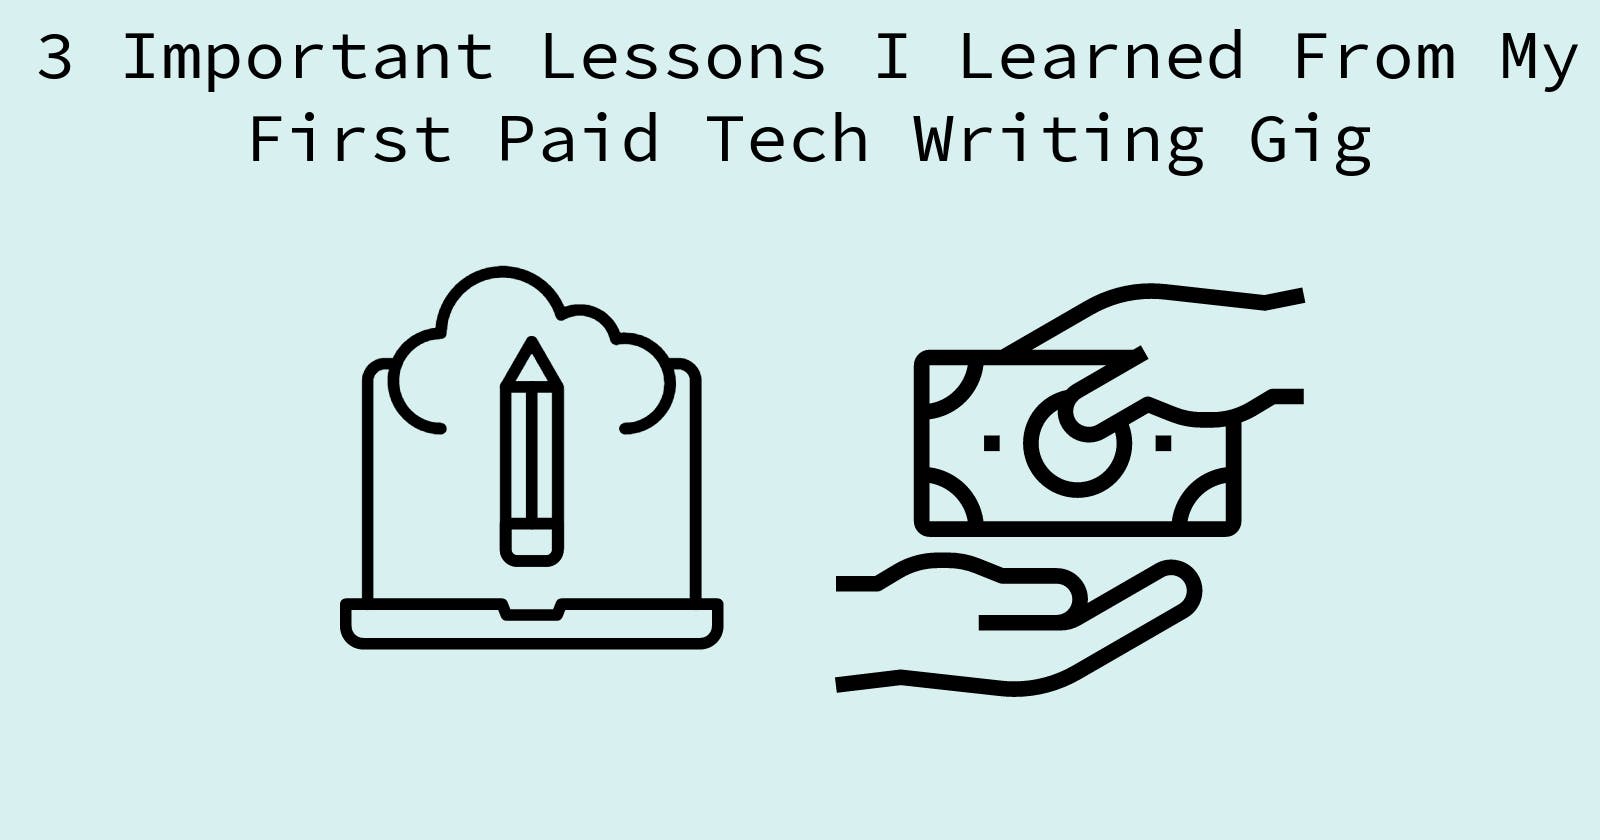 3 Important Lessons I Learned From My First Paid Tech Writing Gig